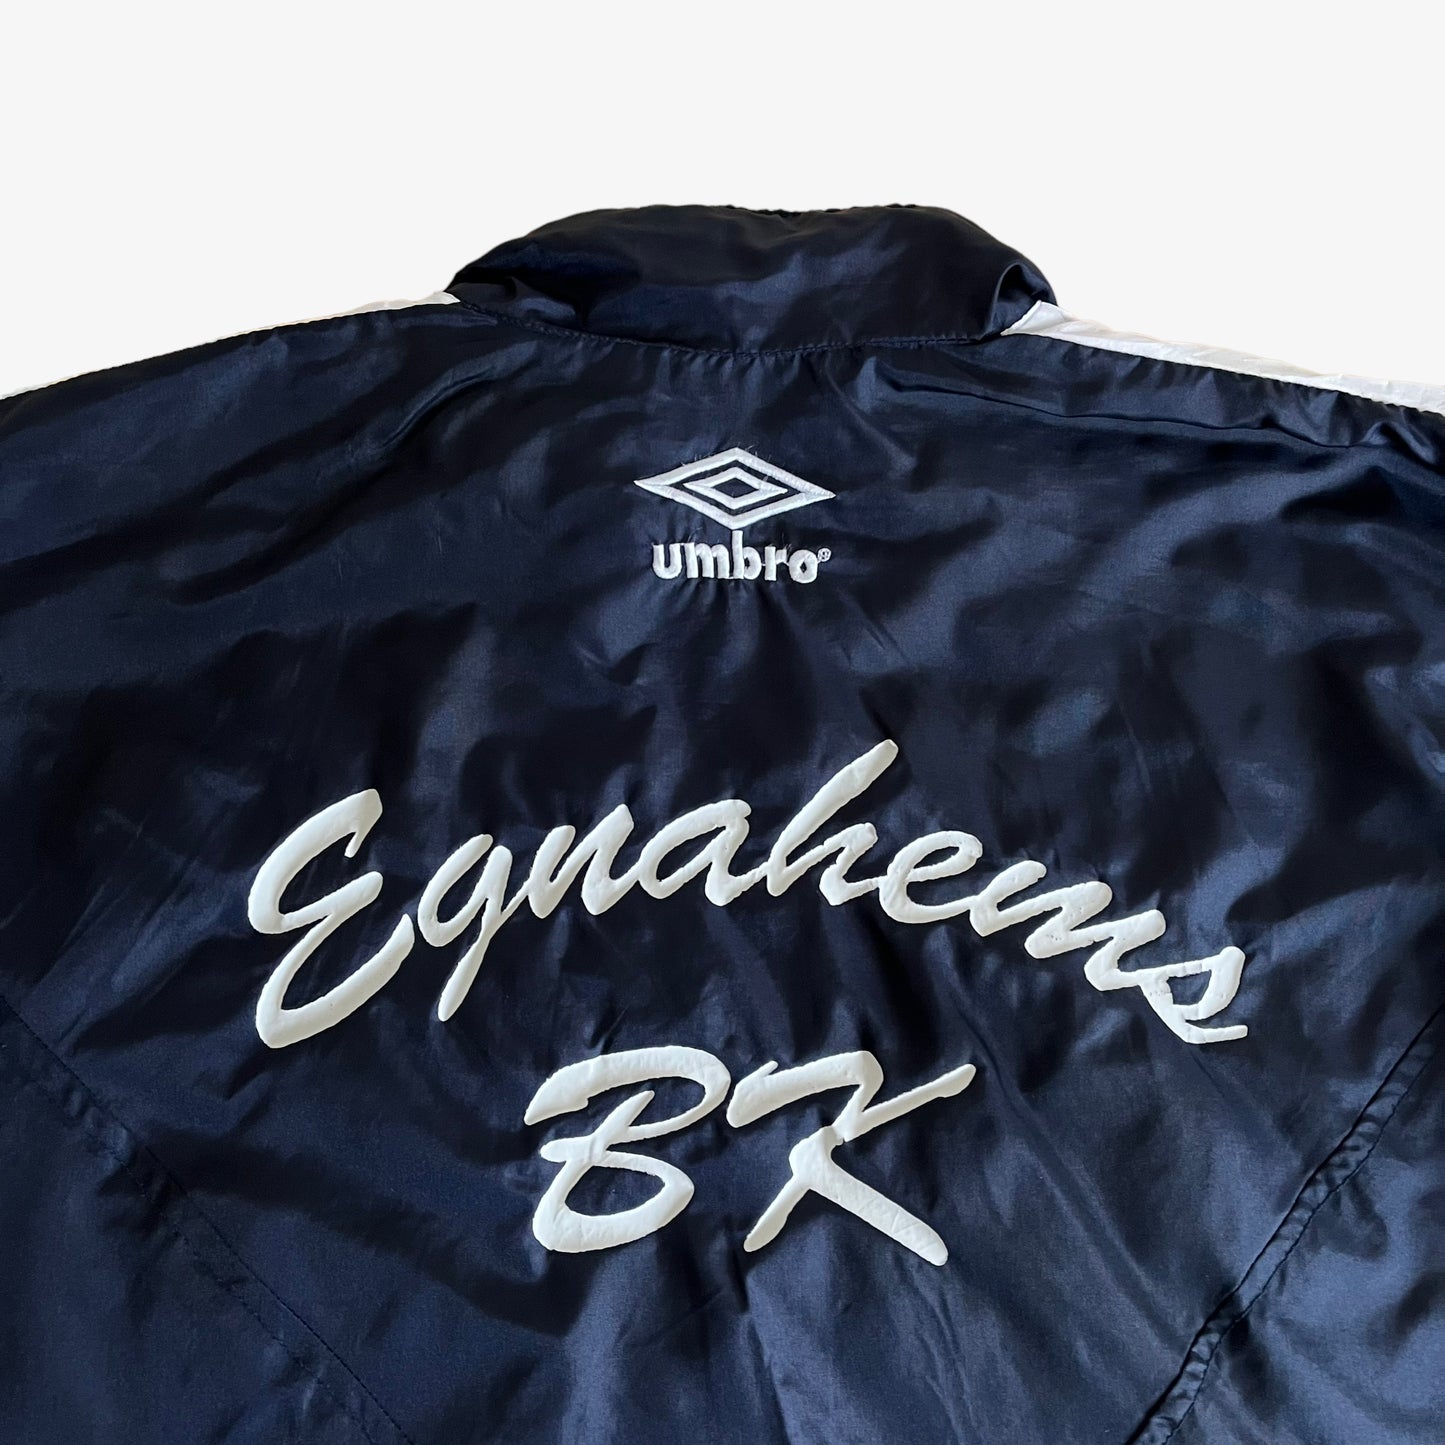 Vintage 90s Umbro England Colourway Track Jacket With Back Spell Out Back Logo - Casspios Dream